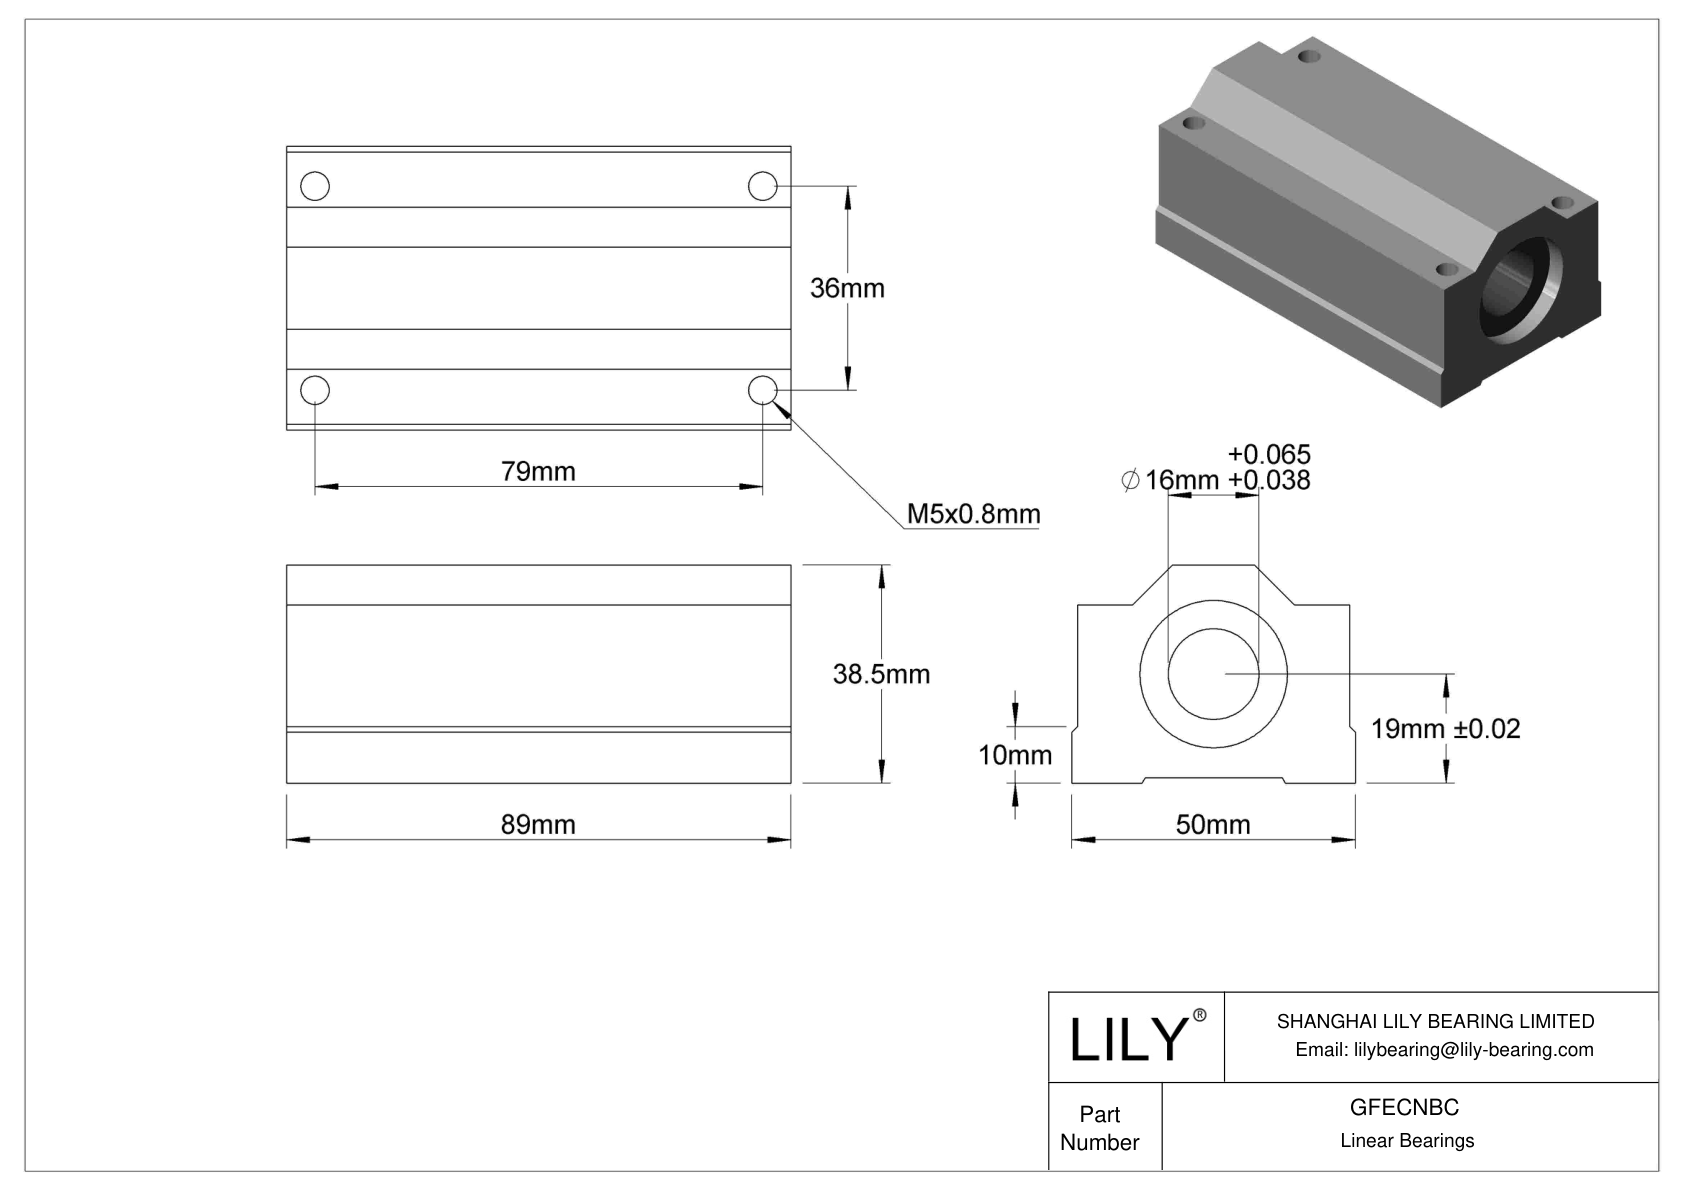 GFECNBC High-Load Mounted Linear Sleeve Bearings cad drawing